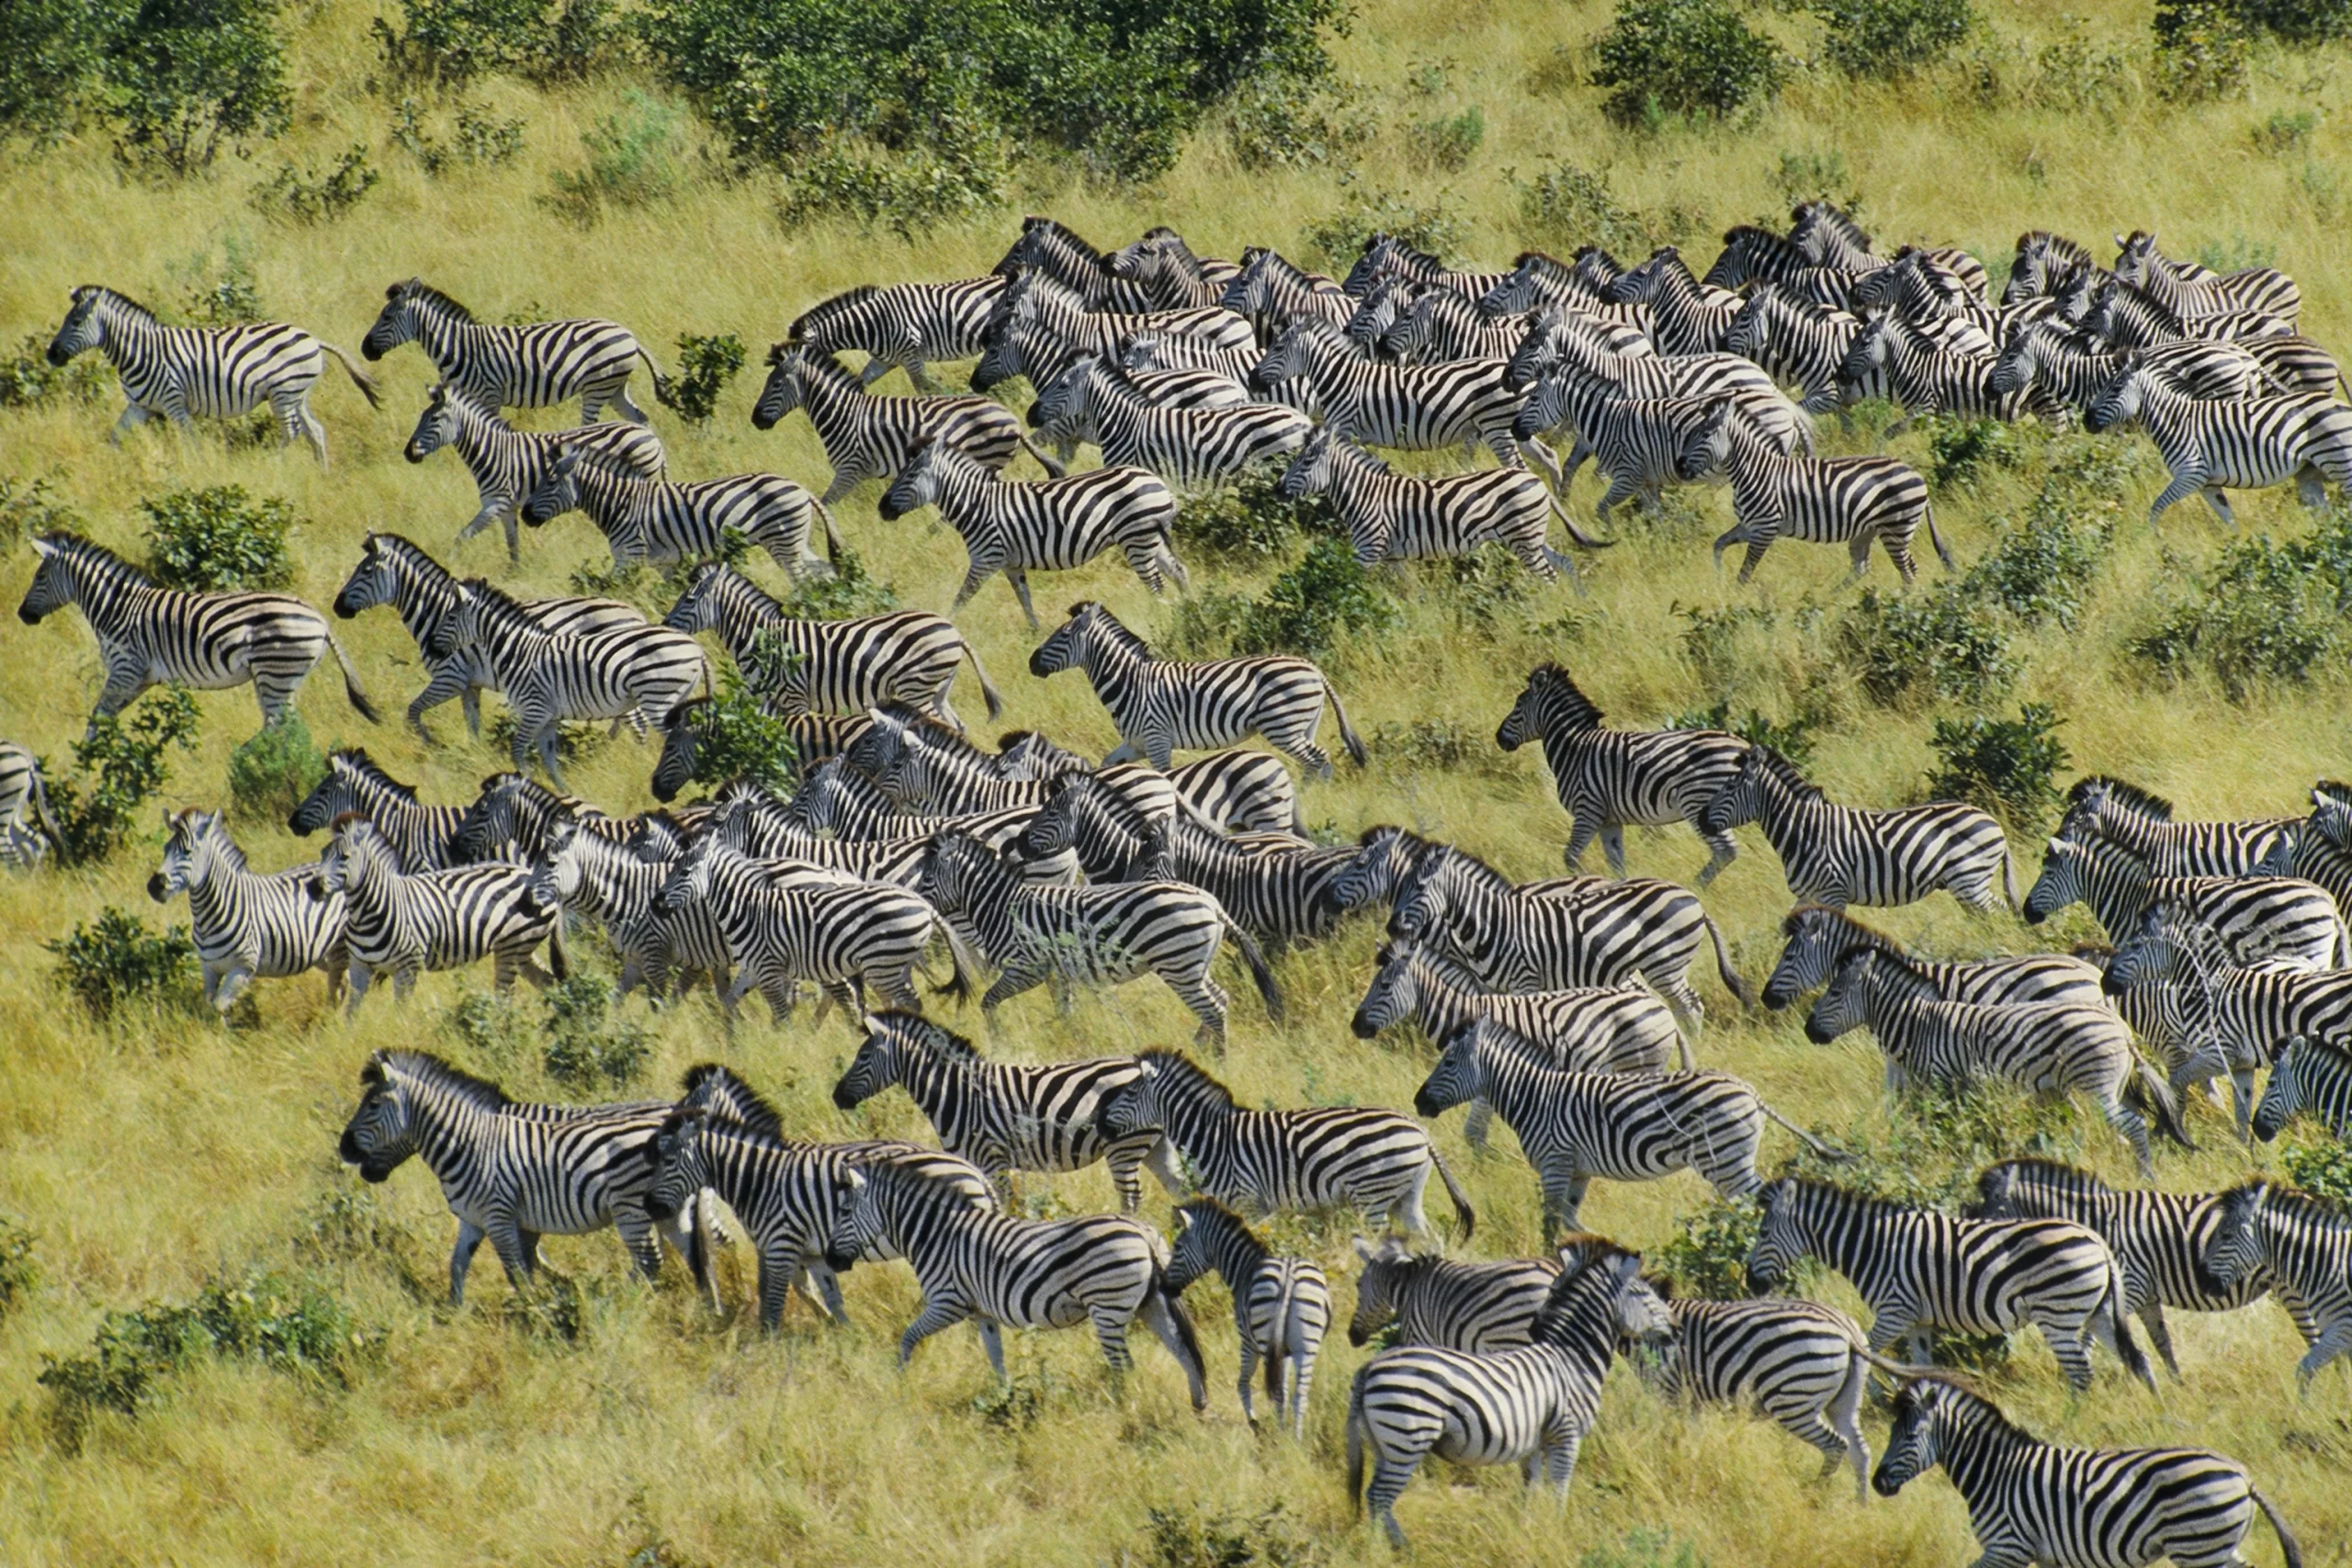 Greatest Animal Migrations in Africa